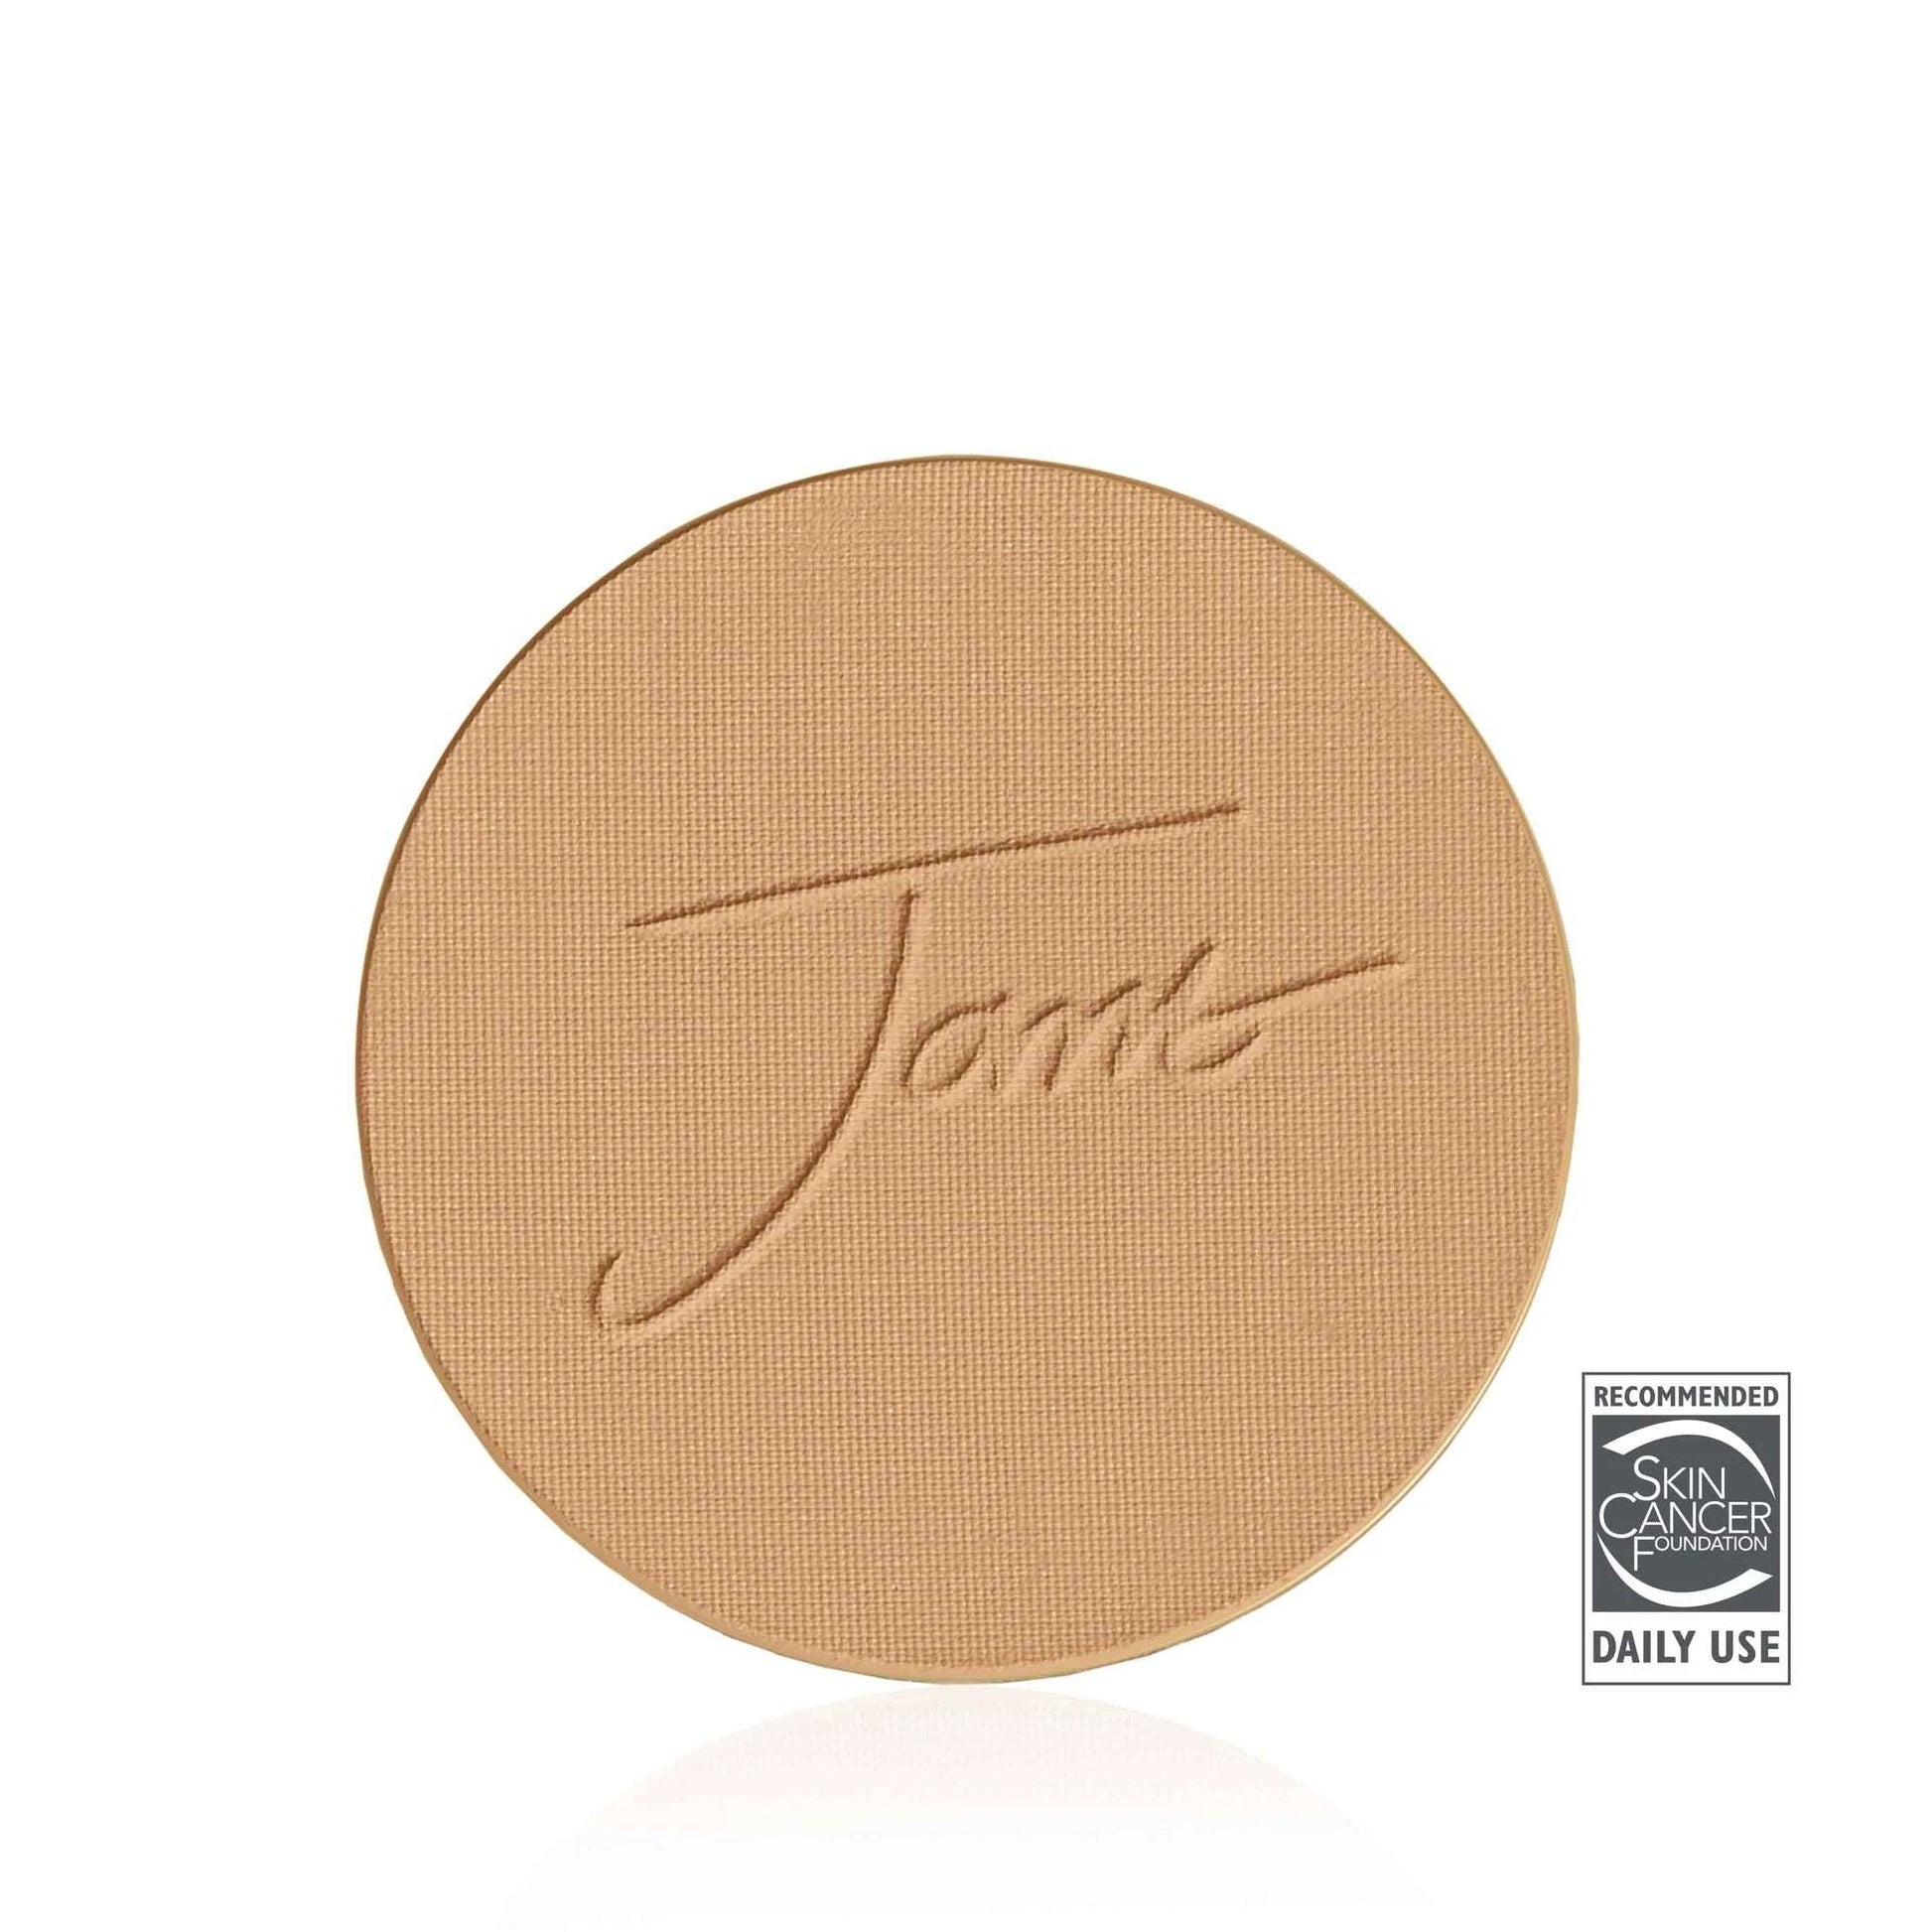 Jane Iredale Purepressed Base Mineral Foundation REFILL SPF 20/15